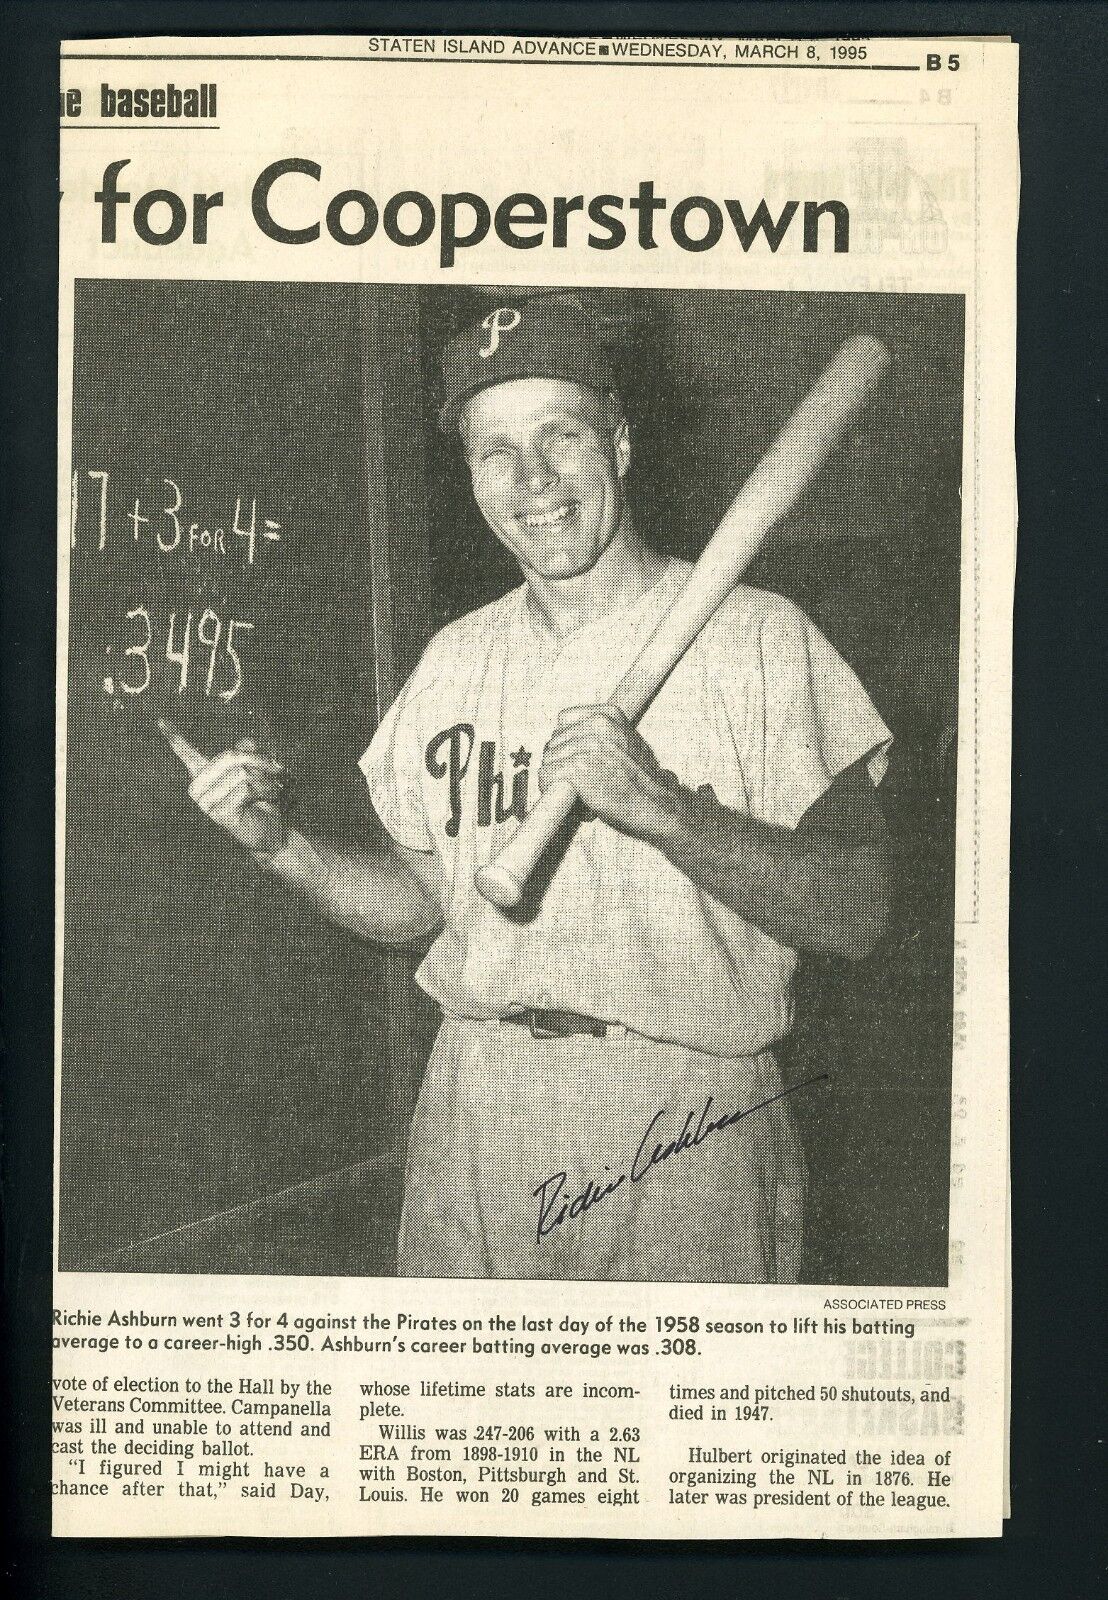 Richie Ashburn Signed Autographed Hall Of Fame Newspaper w/ JSA Authentication